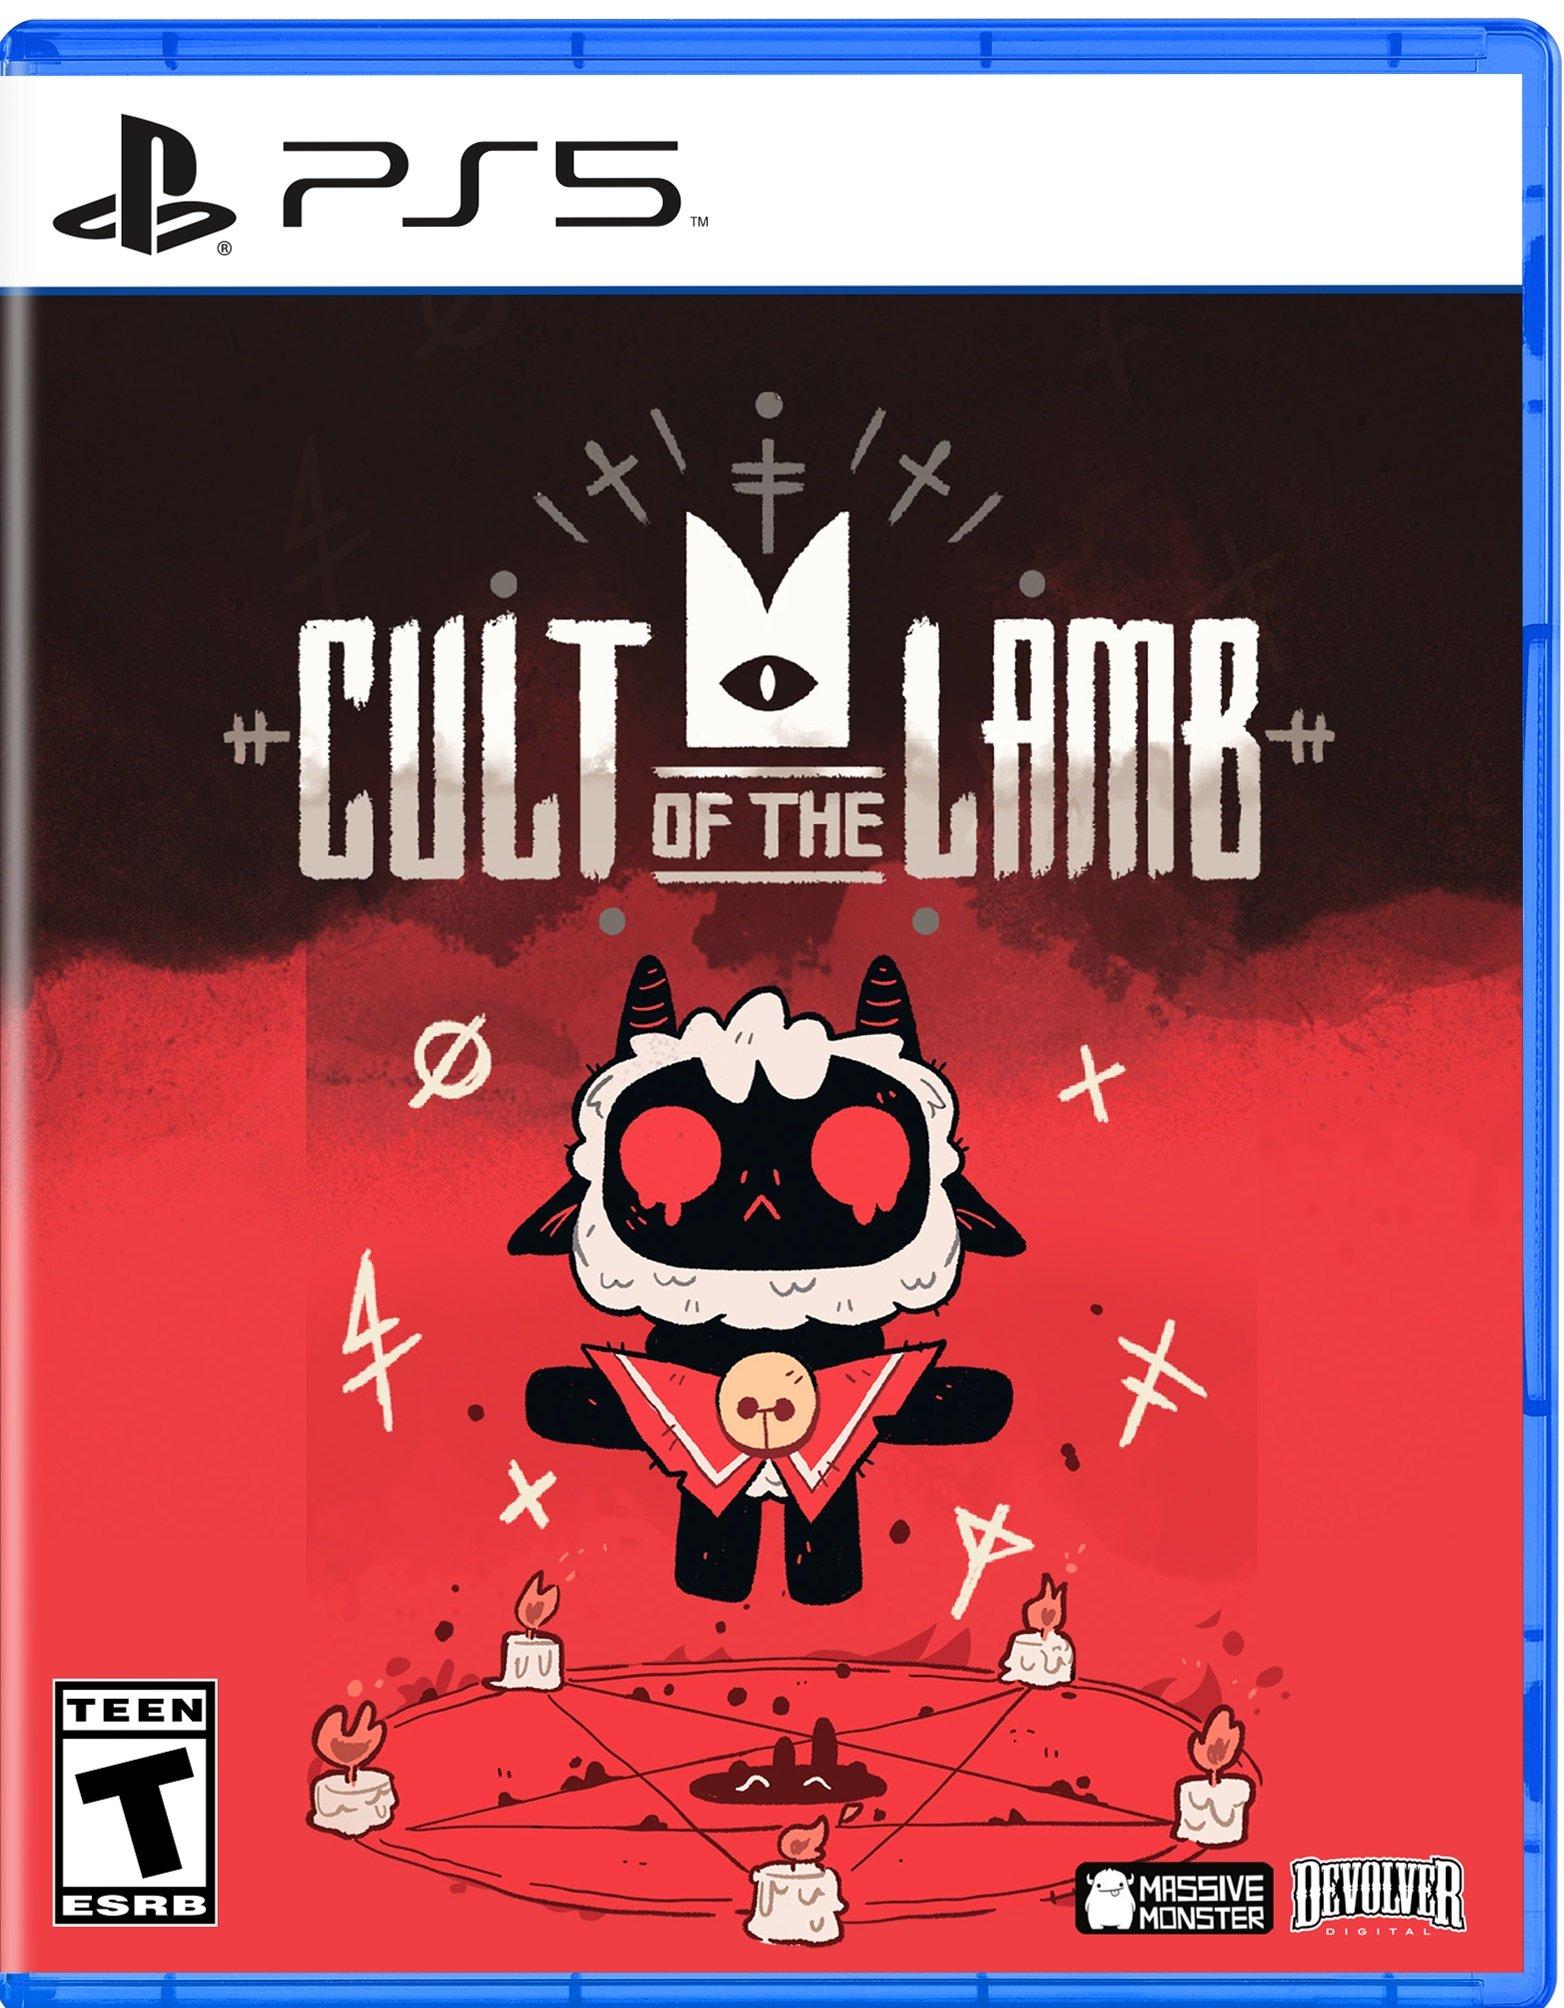 Cult of the Lamb Deluxe Edition Nintendo Switch EXCELLENT Condition